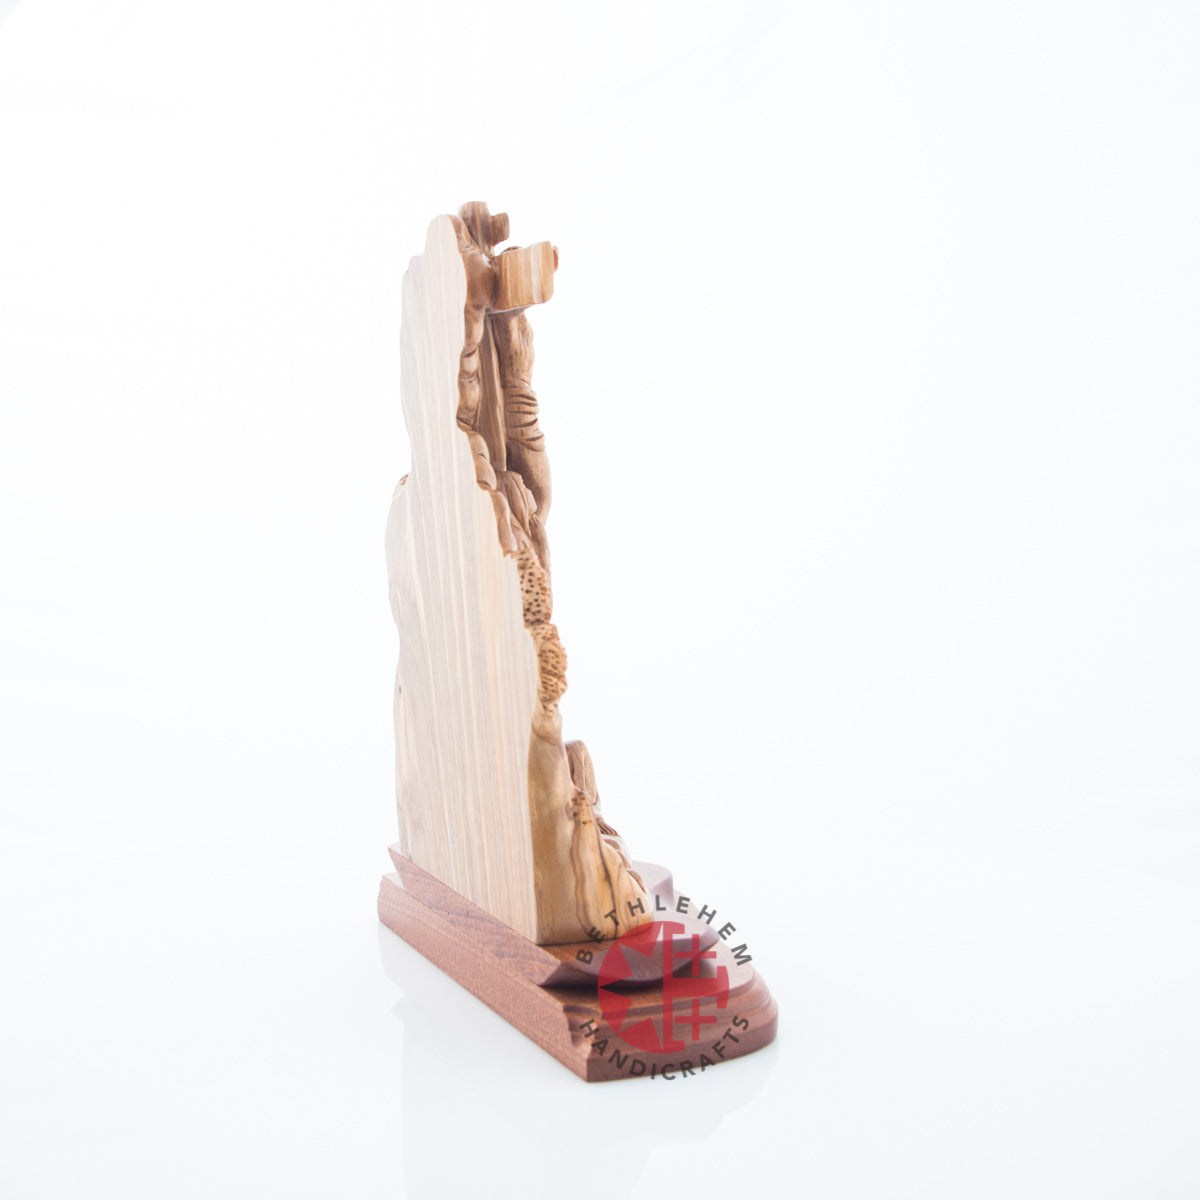 Olive Wood Crucifixion Statue with Virgin Mary, Mary Magdalene and St. John - Statuettes - Bethlehem Handicrafts